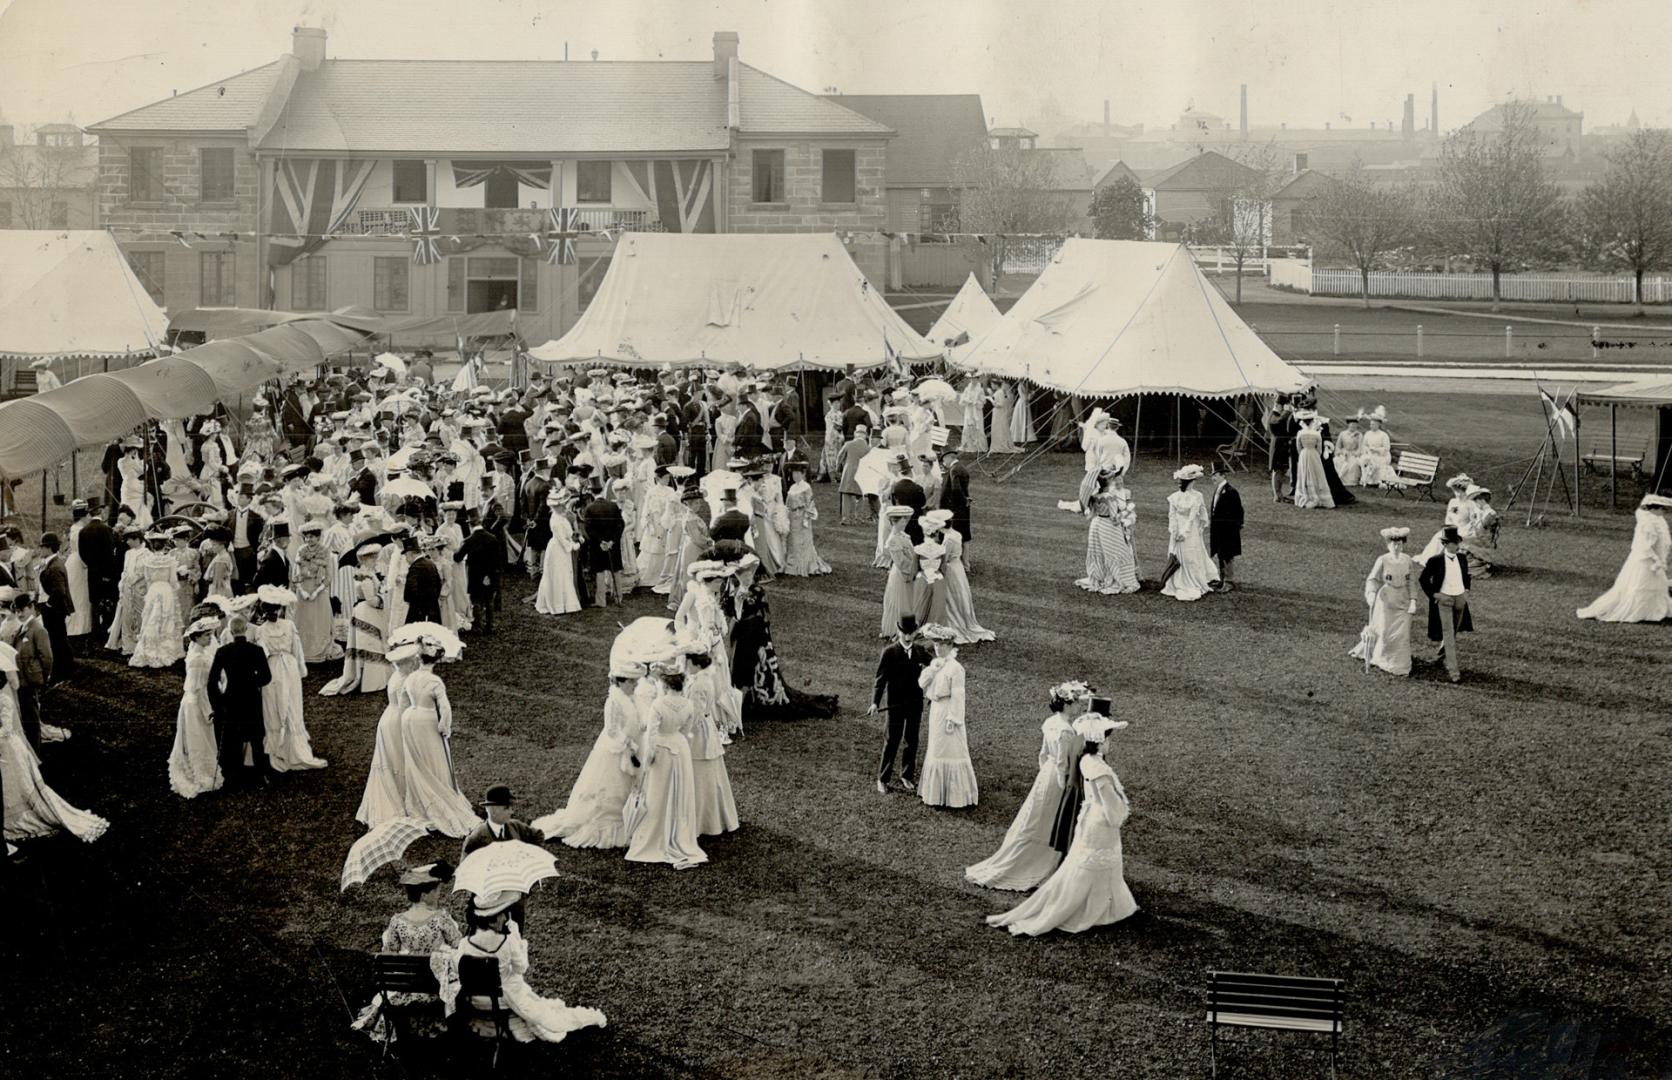 Garden party at turn of the century was colorful event of the society season